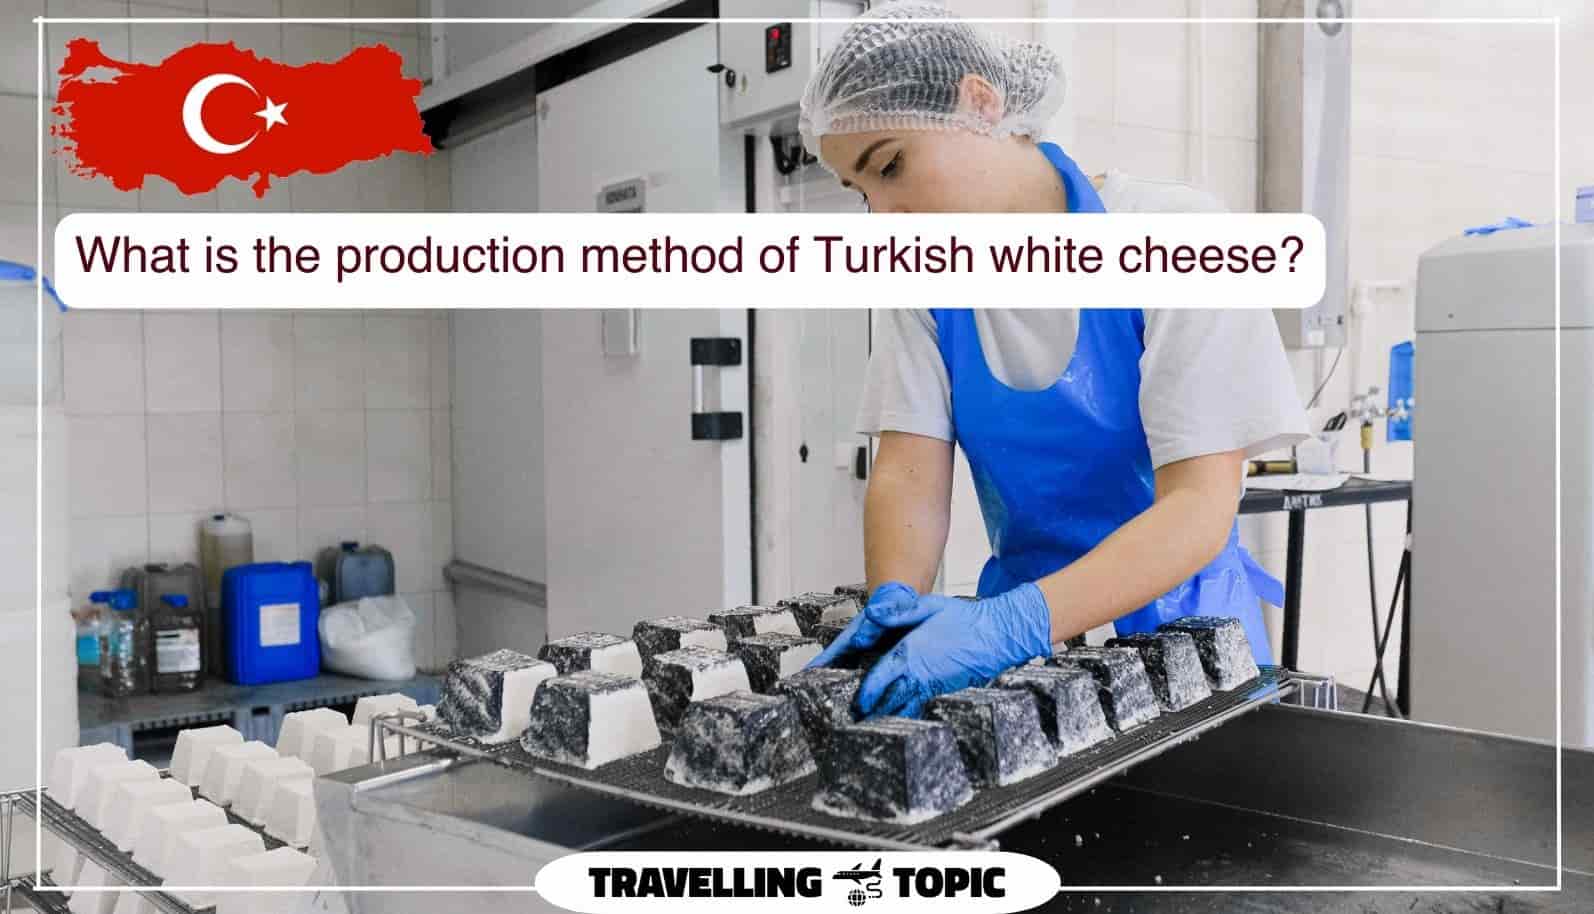 What is the production method of Turkish white cheese